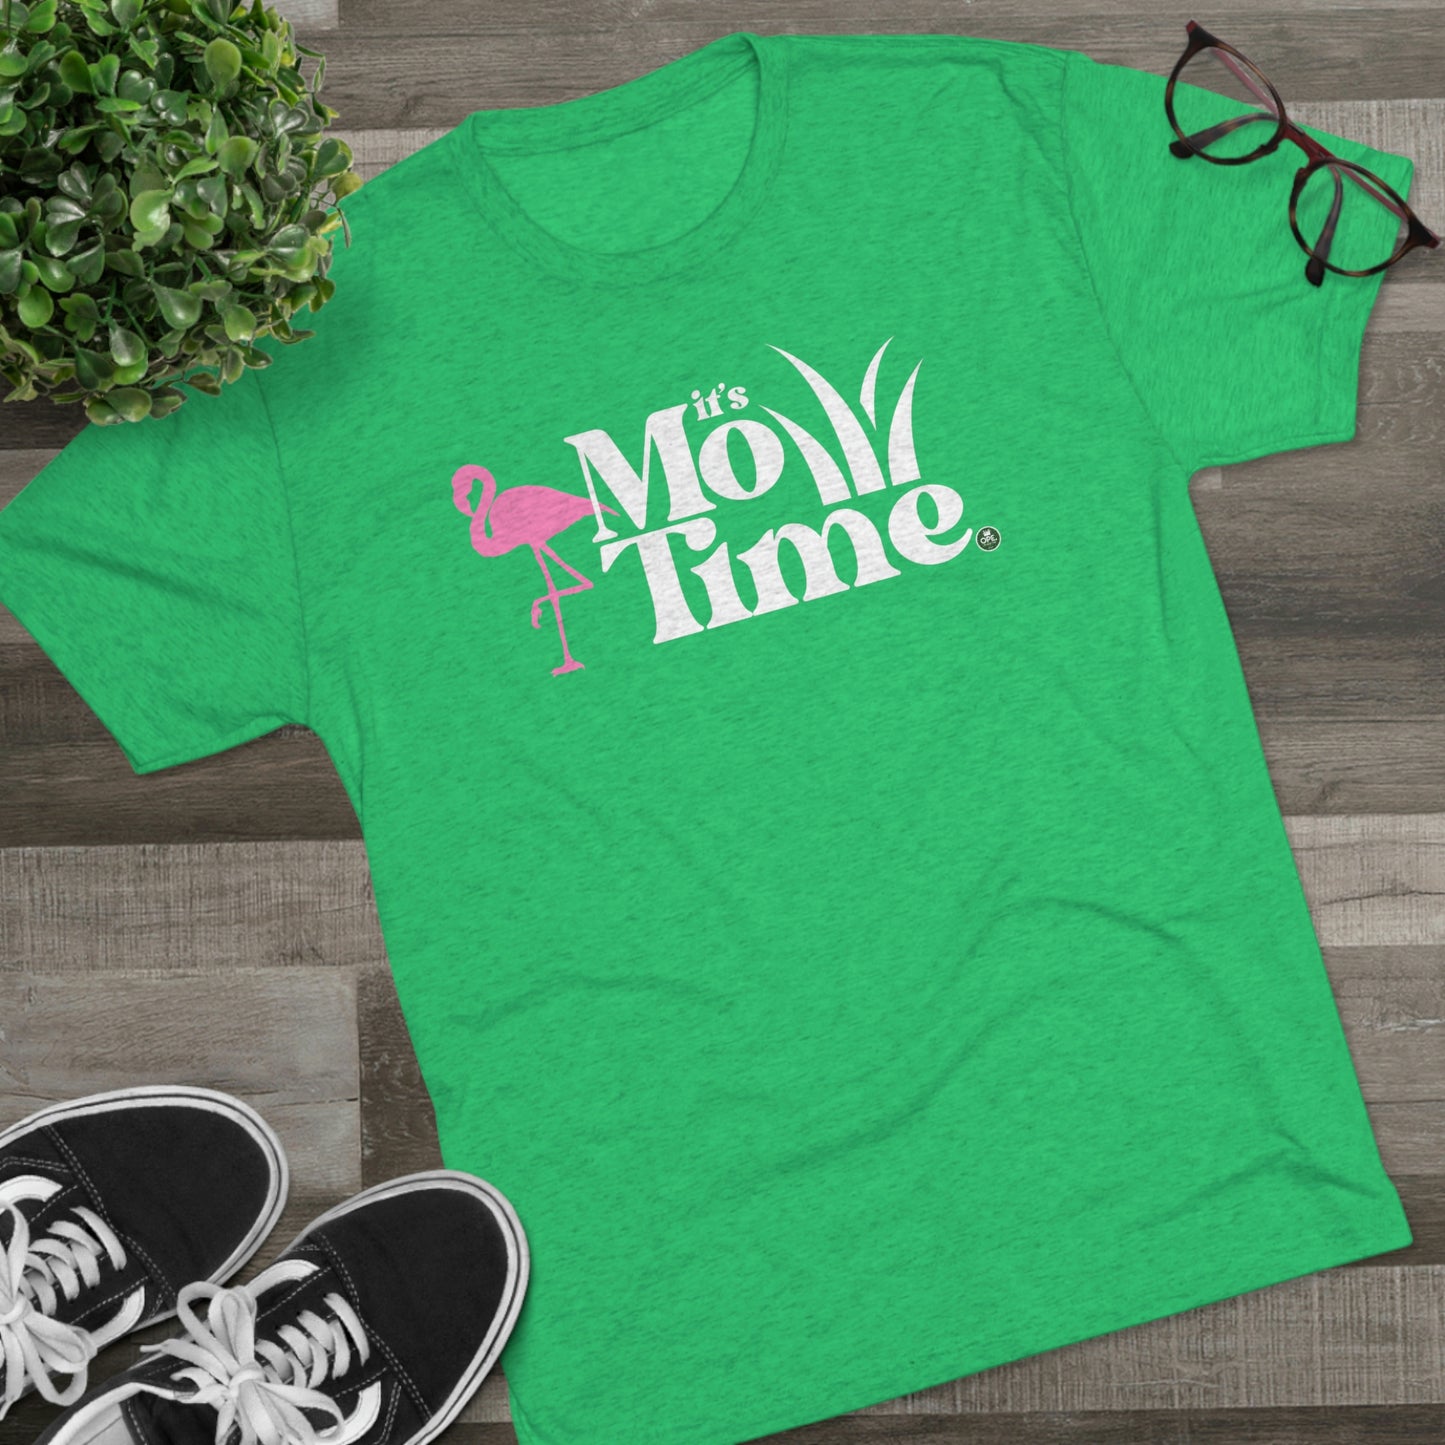 It's Mow Time Shirt